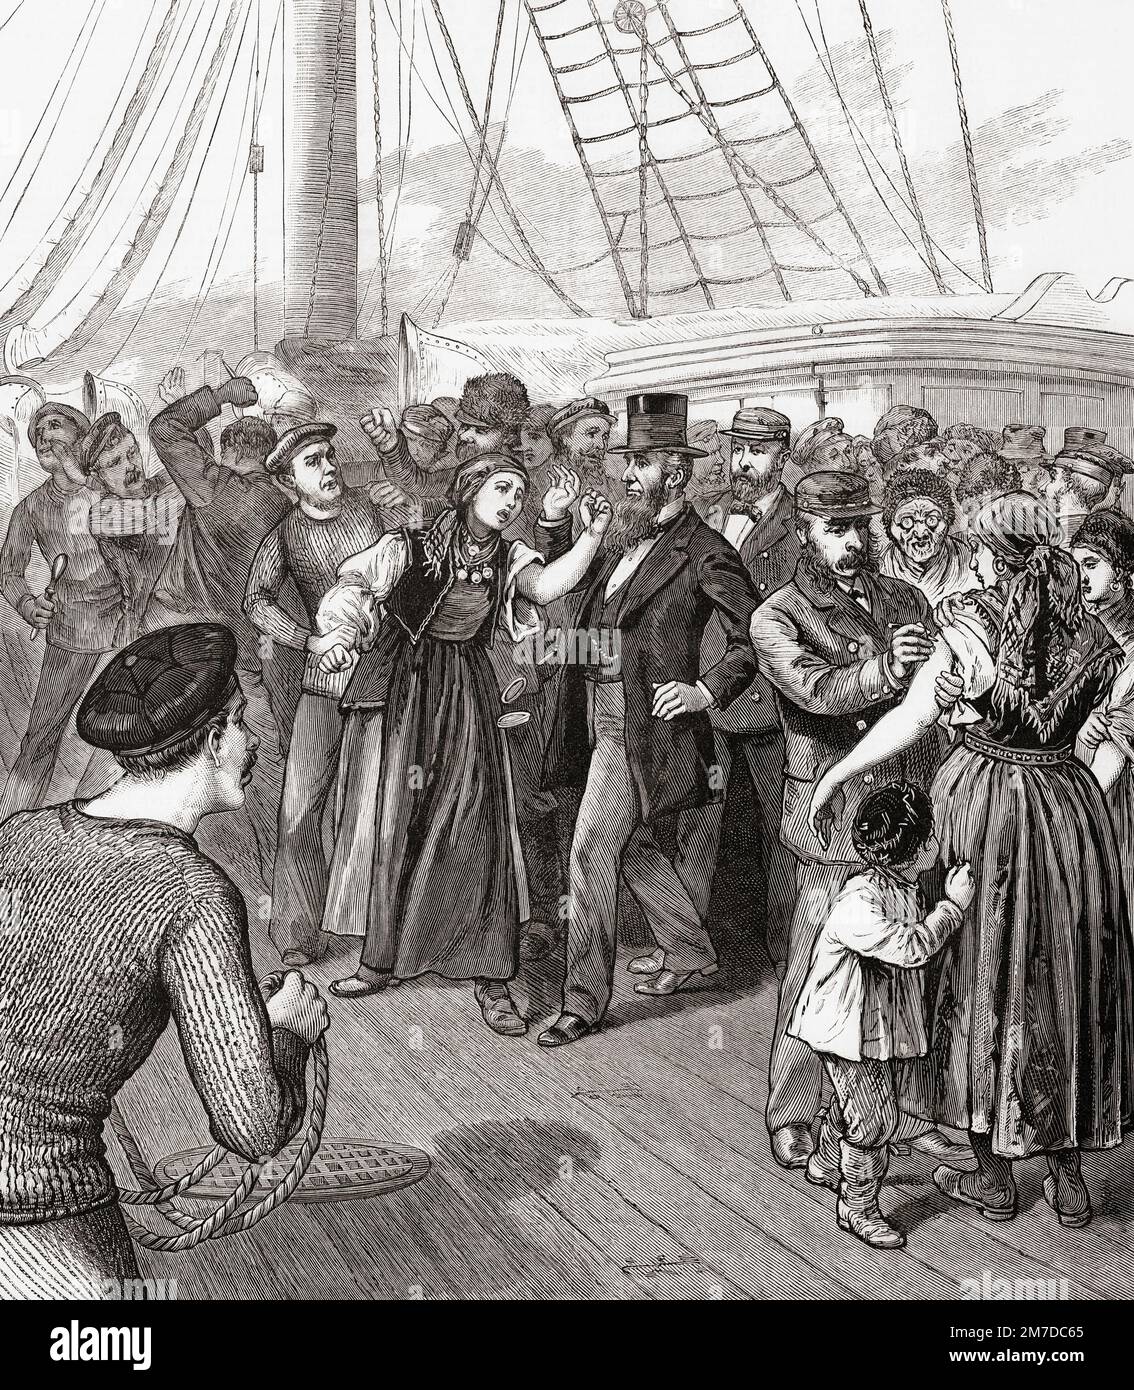 New York City health officers vaccinating Russian and Polish immigrants against smallpox at the quarantine station.  Some are objecting.  After an illustration in Frank Leslie's Illustrated Newspaper, December 26, 1885. Stock Photo